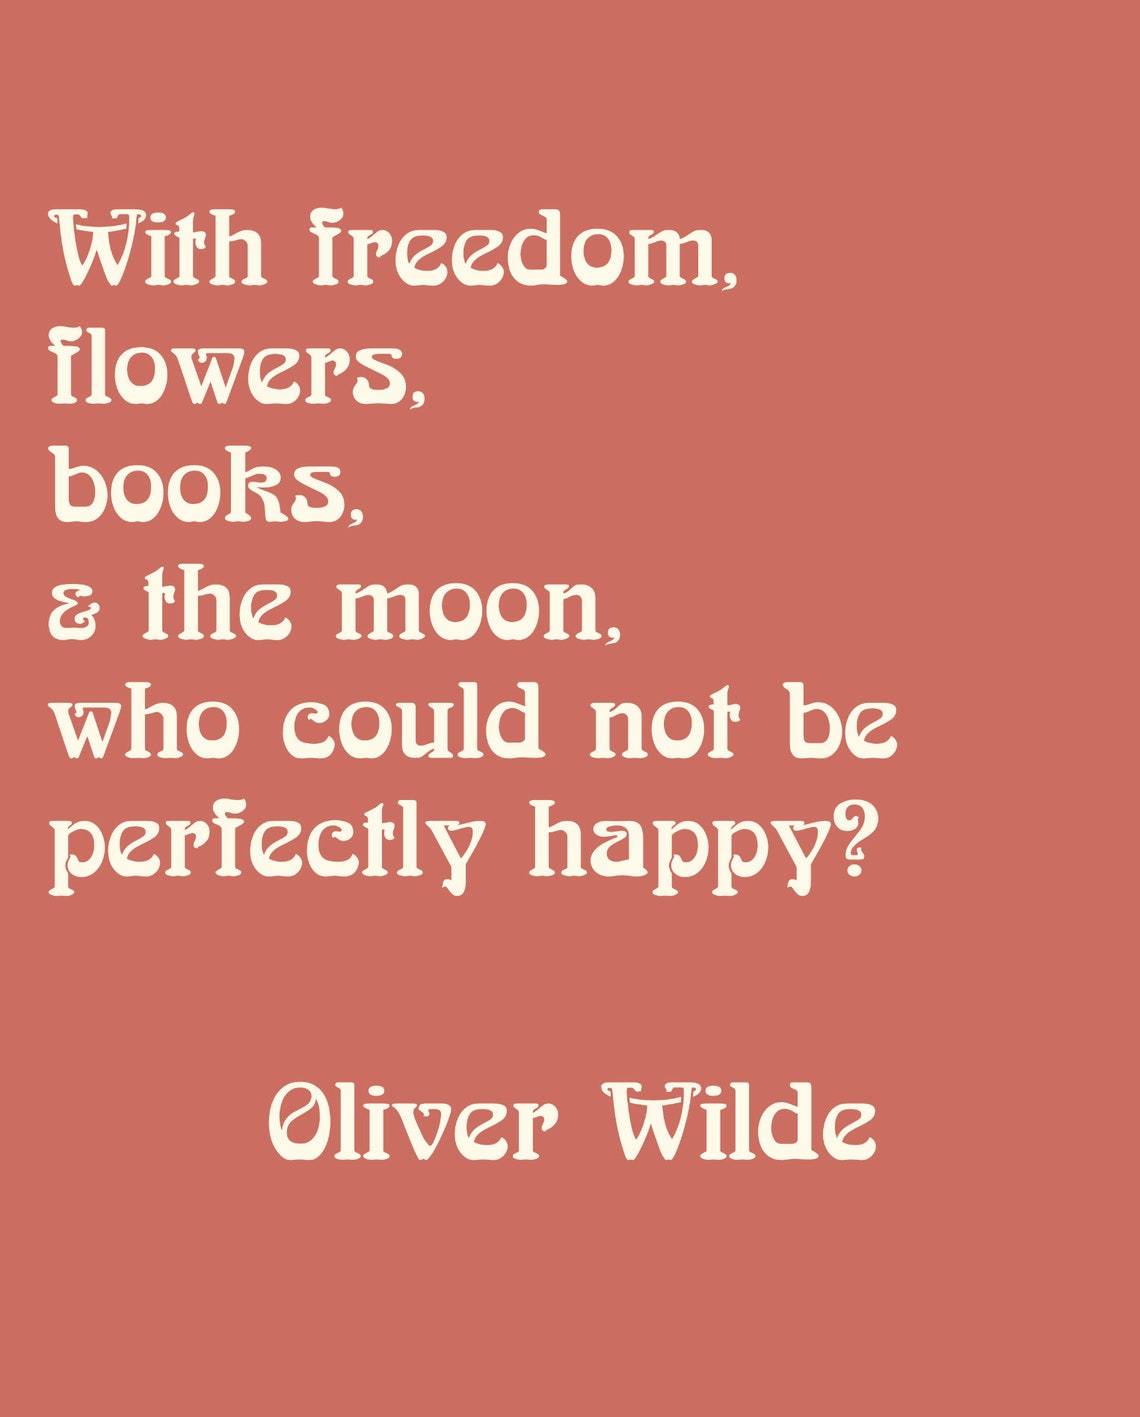 Oliver Wilde Quote With freedom flowers books& the moon | Etsy